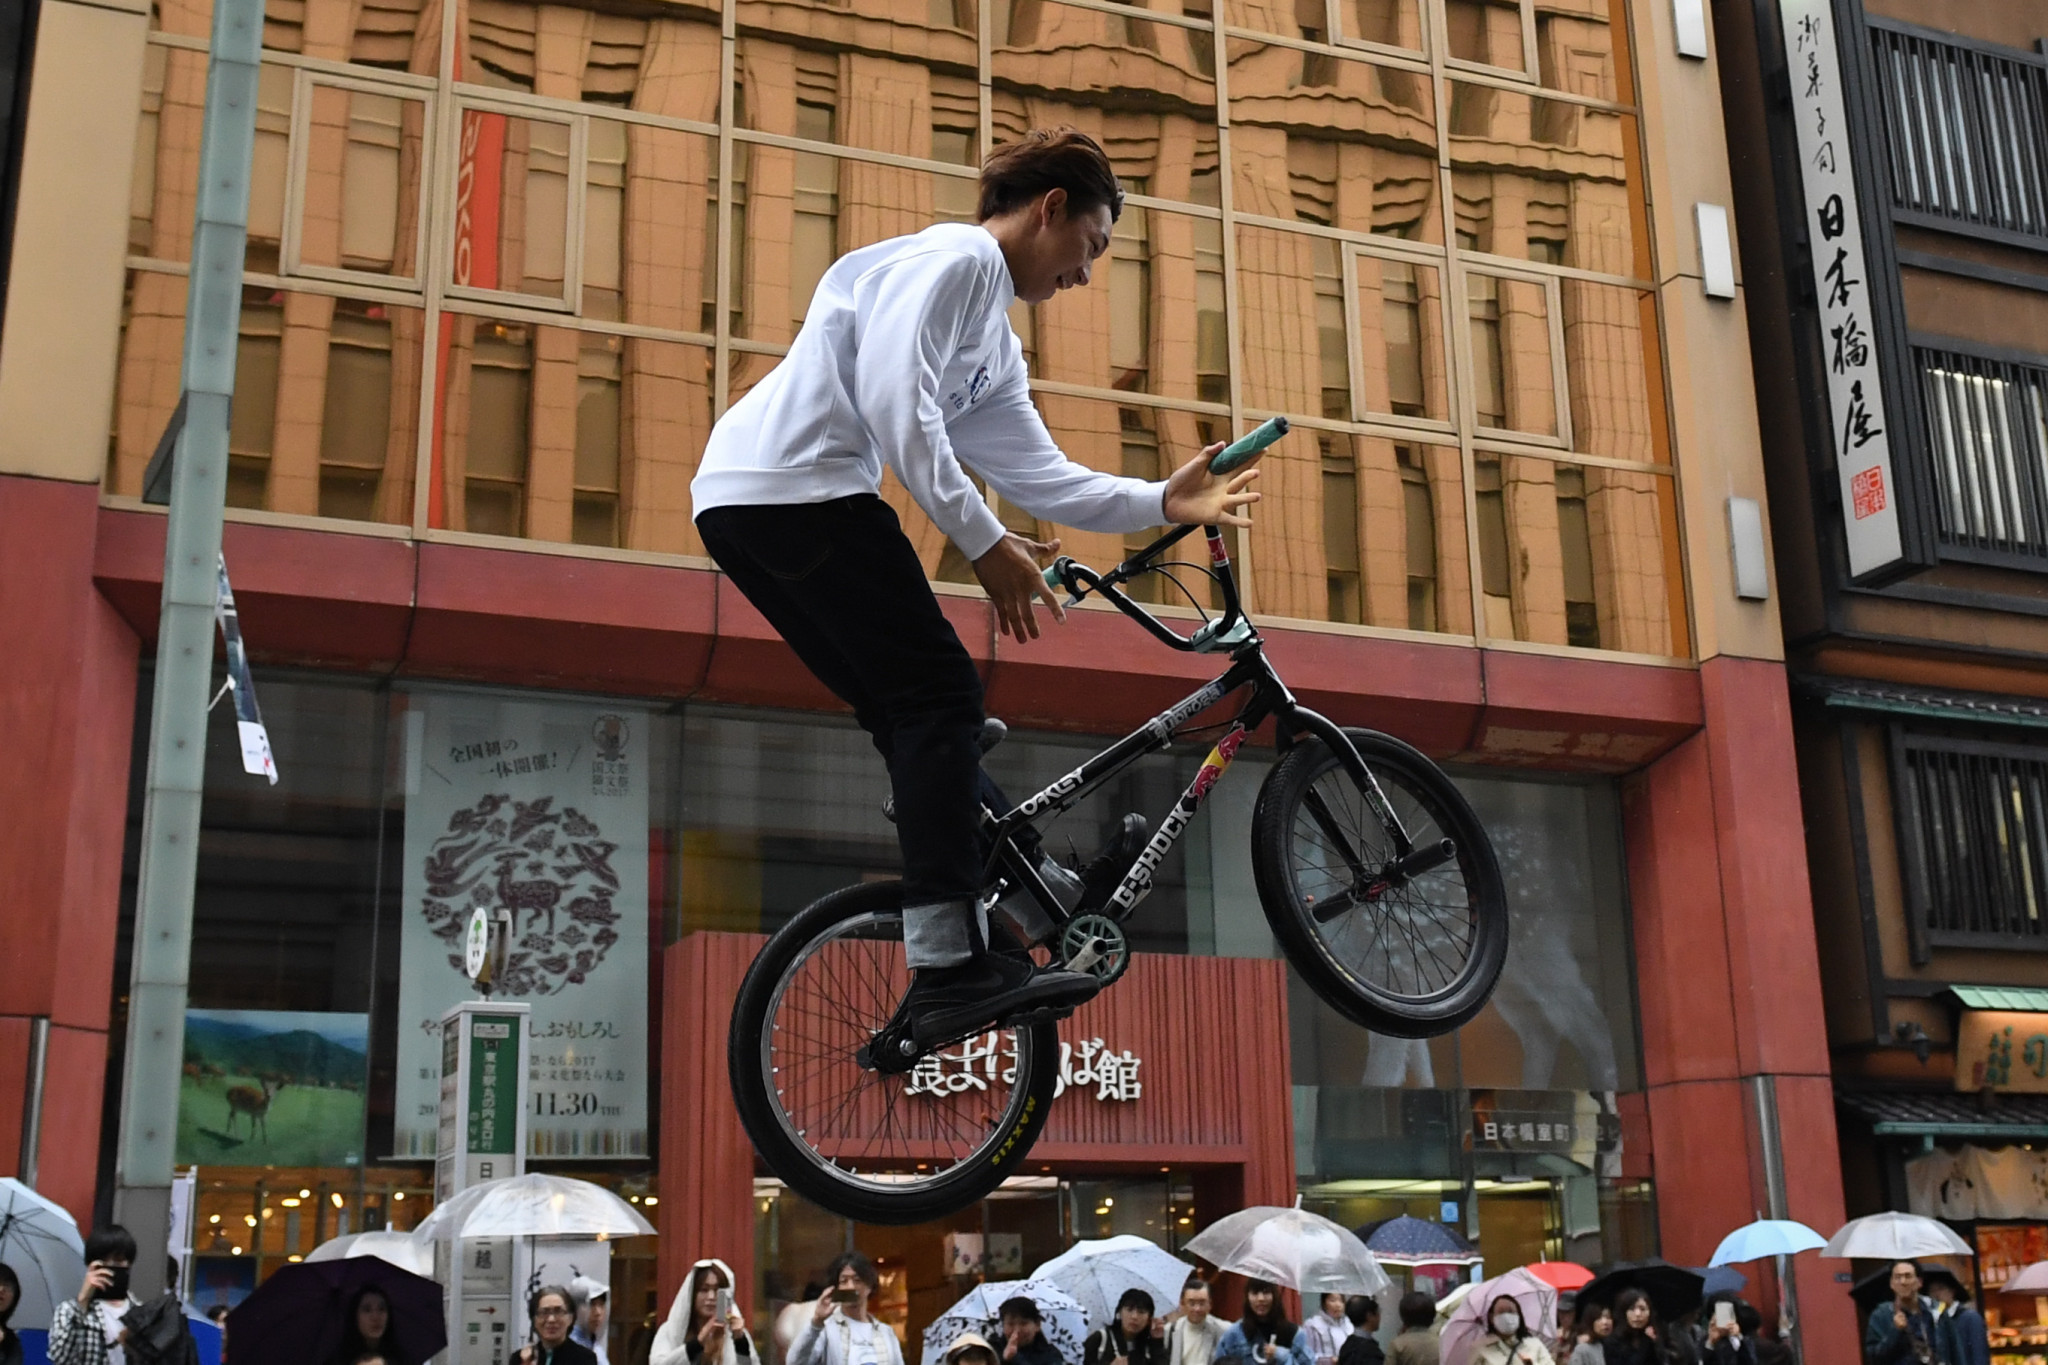 Tokyo 2020 and the IOC are in discussions over establishing zones to allow people to try urban sports ©Getty Images